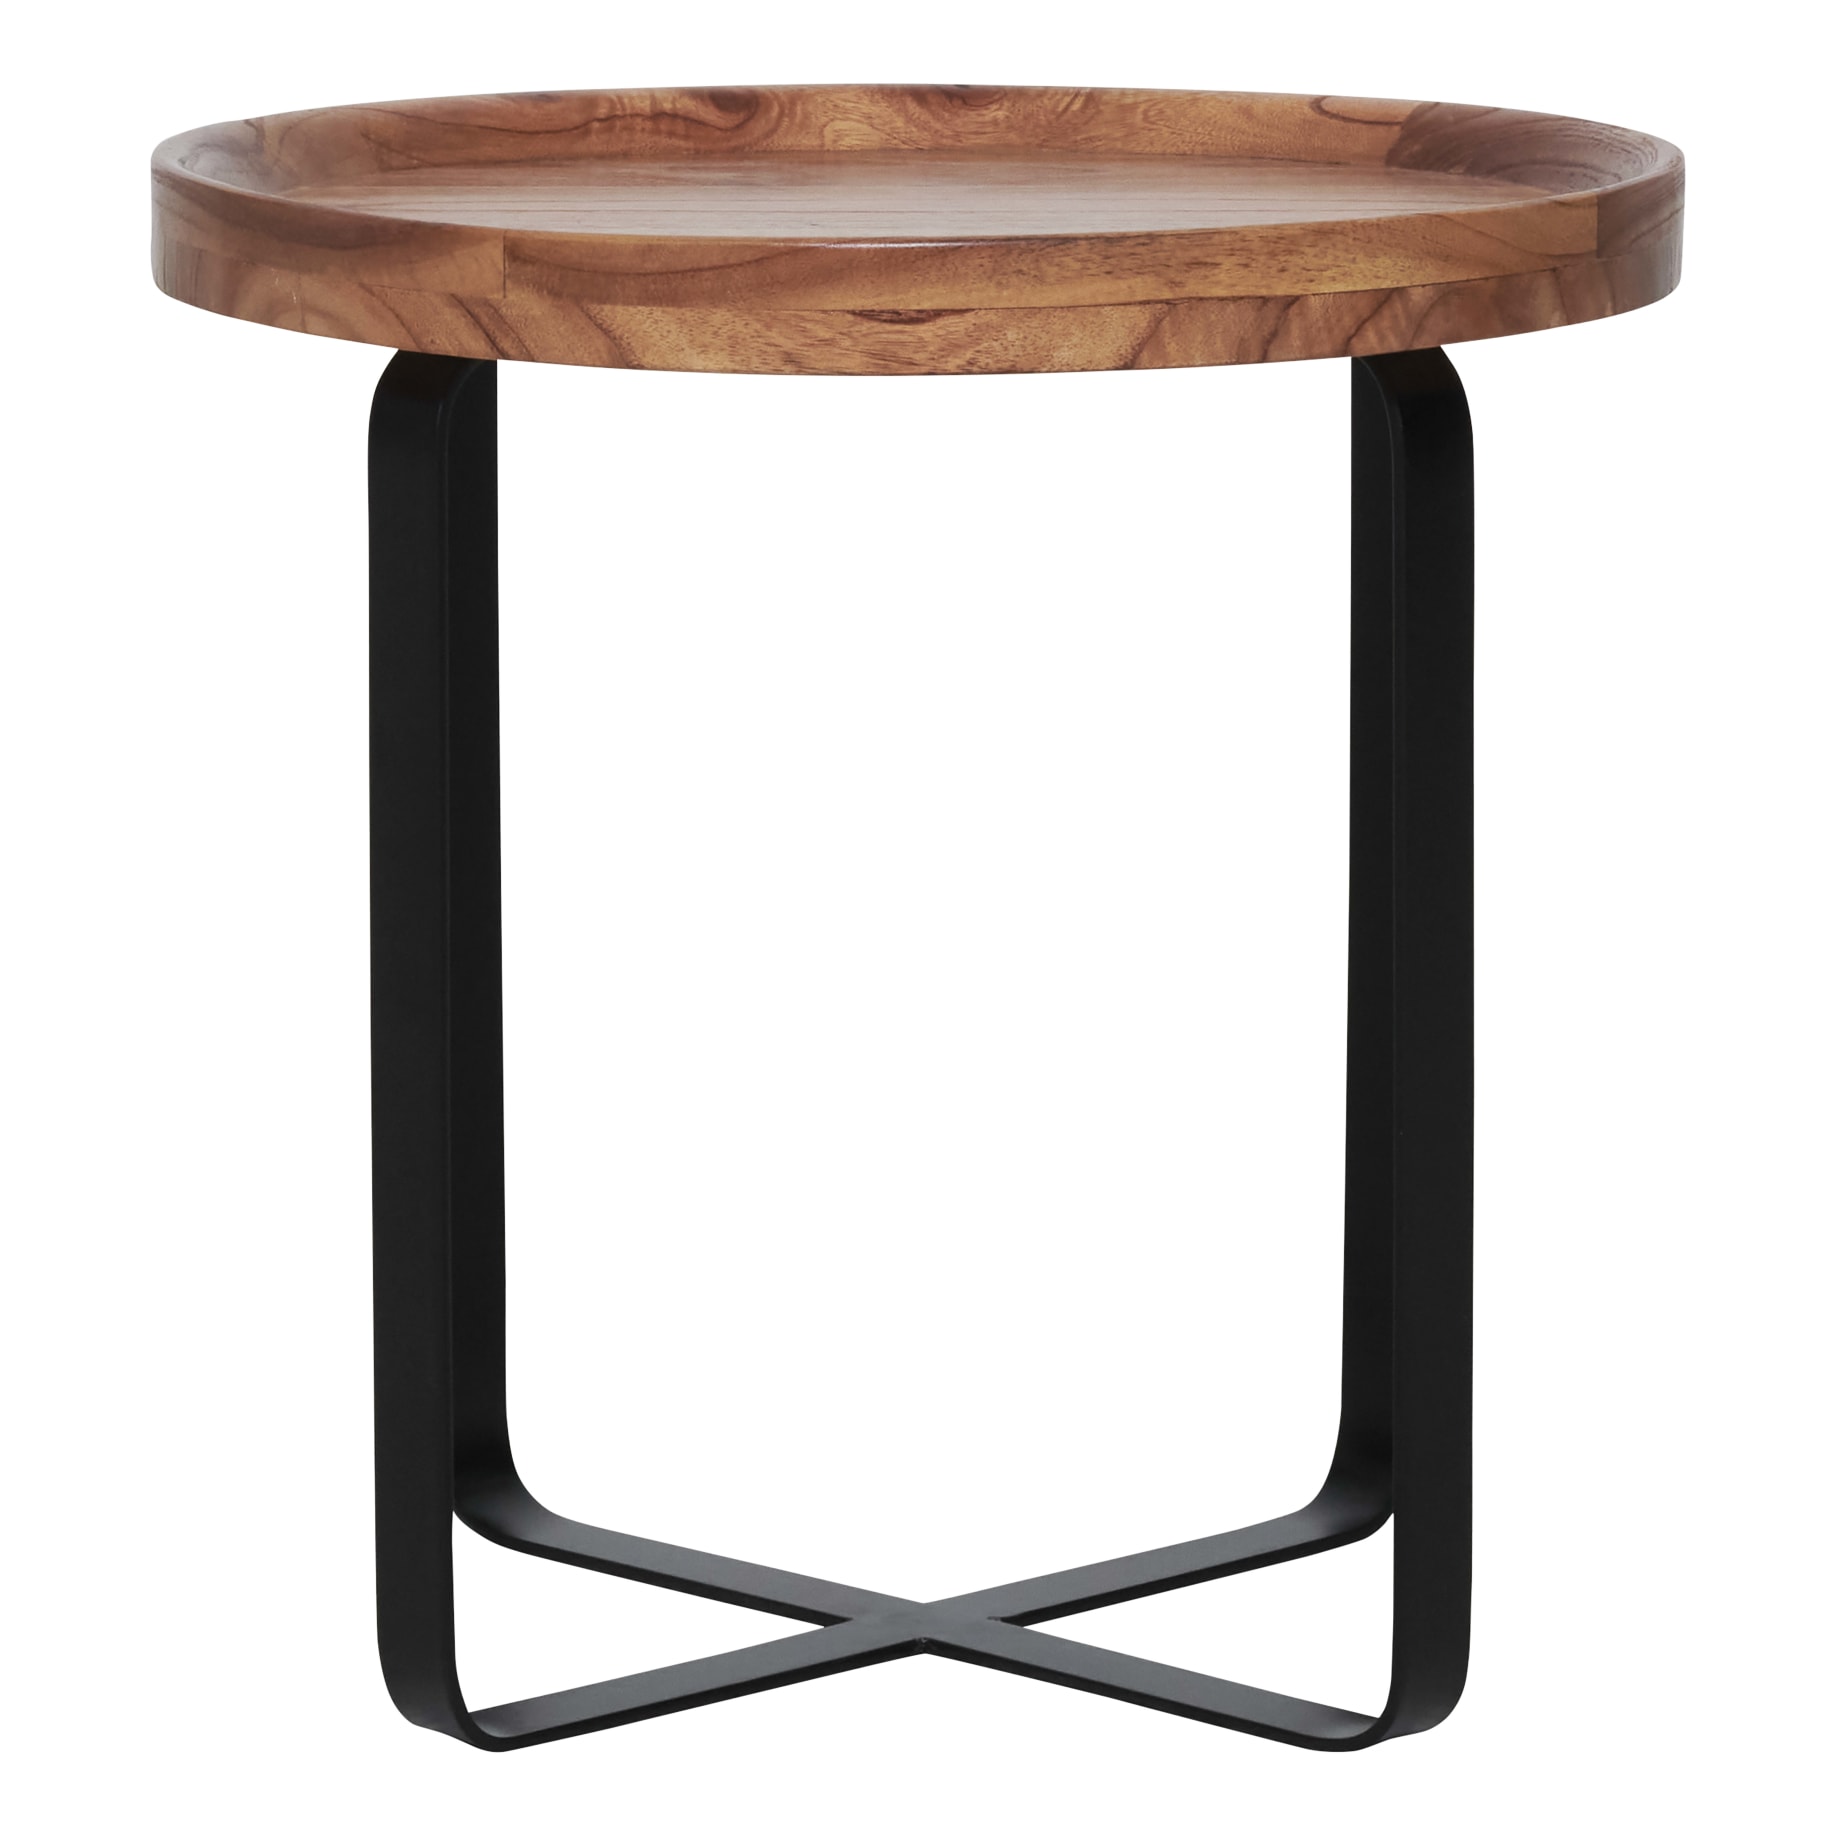 Zambia Round Low Side Table 45 x 45cm in Natural / Black